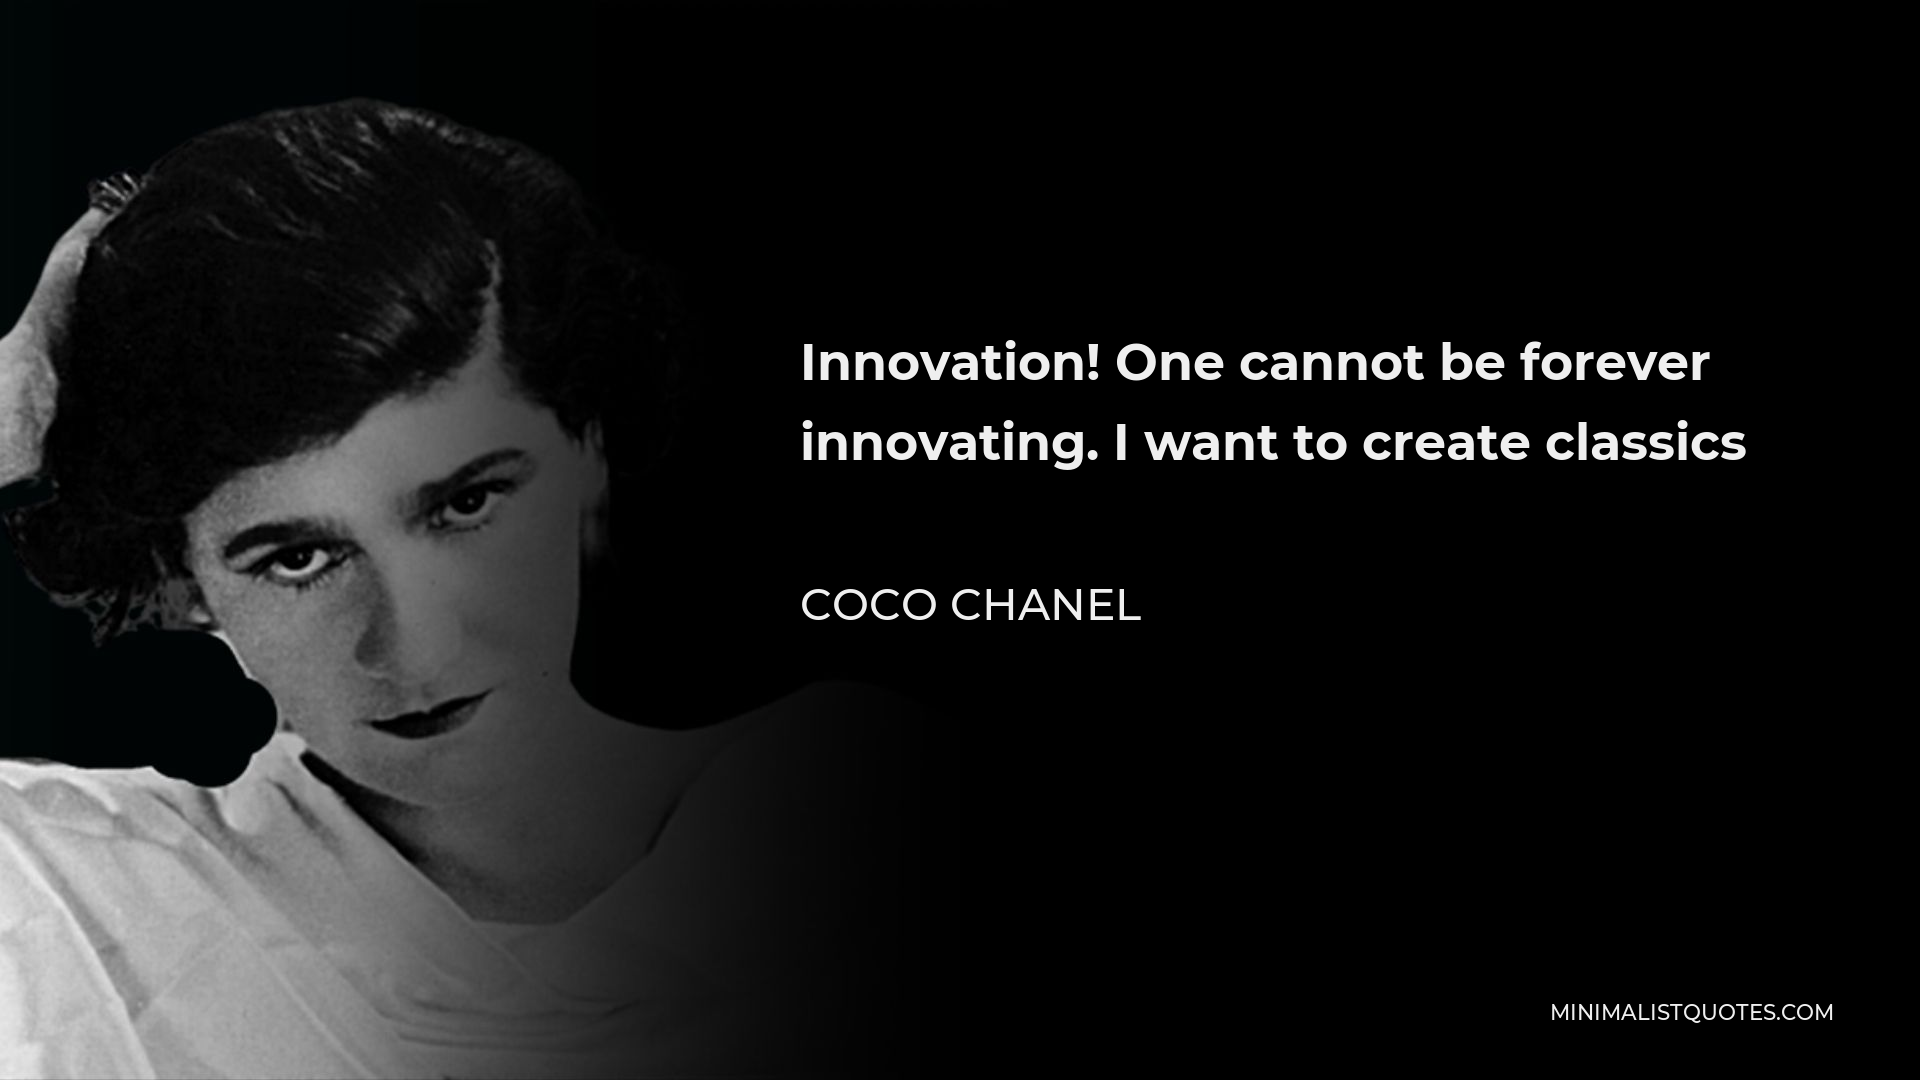 Coco Chanel Quote - Innovation! One cannot be forever innovating. I want to create classics